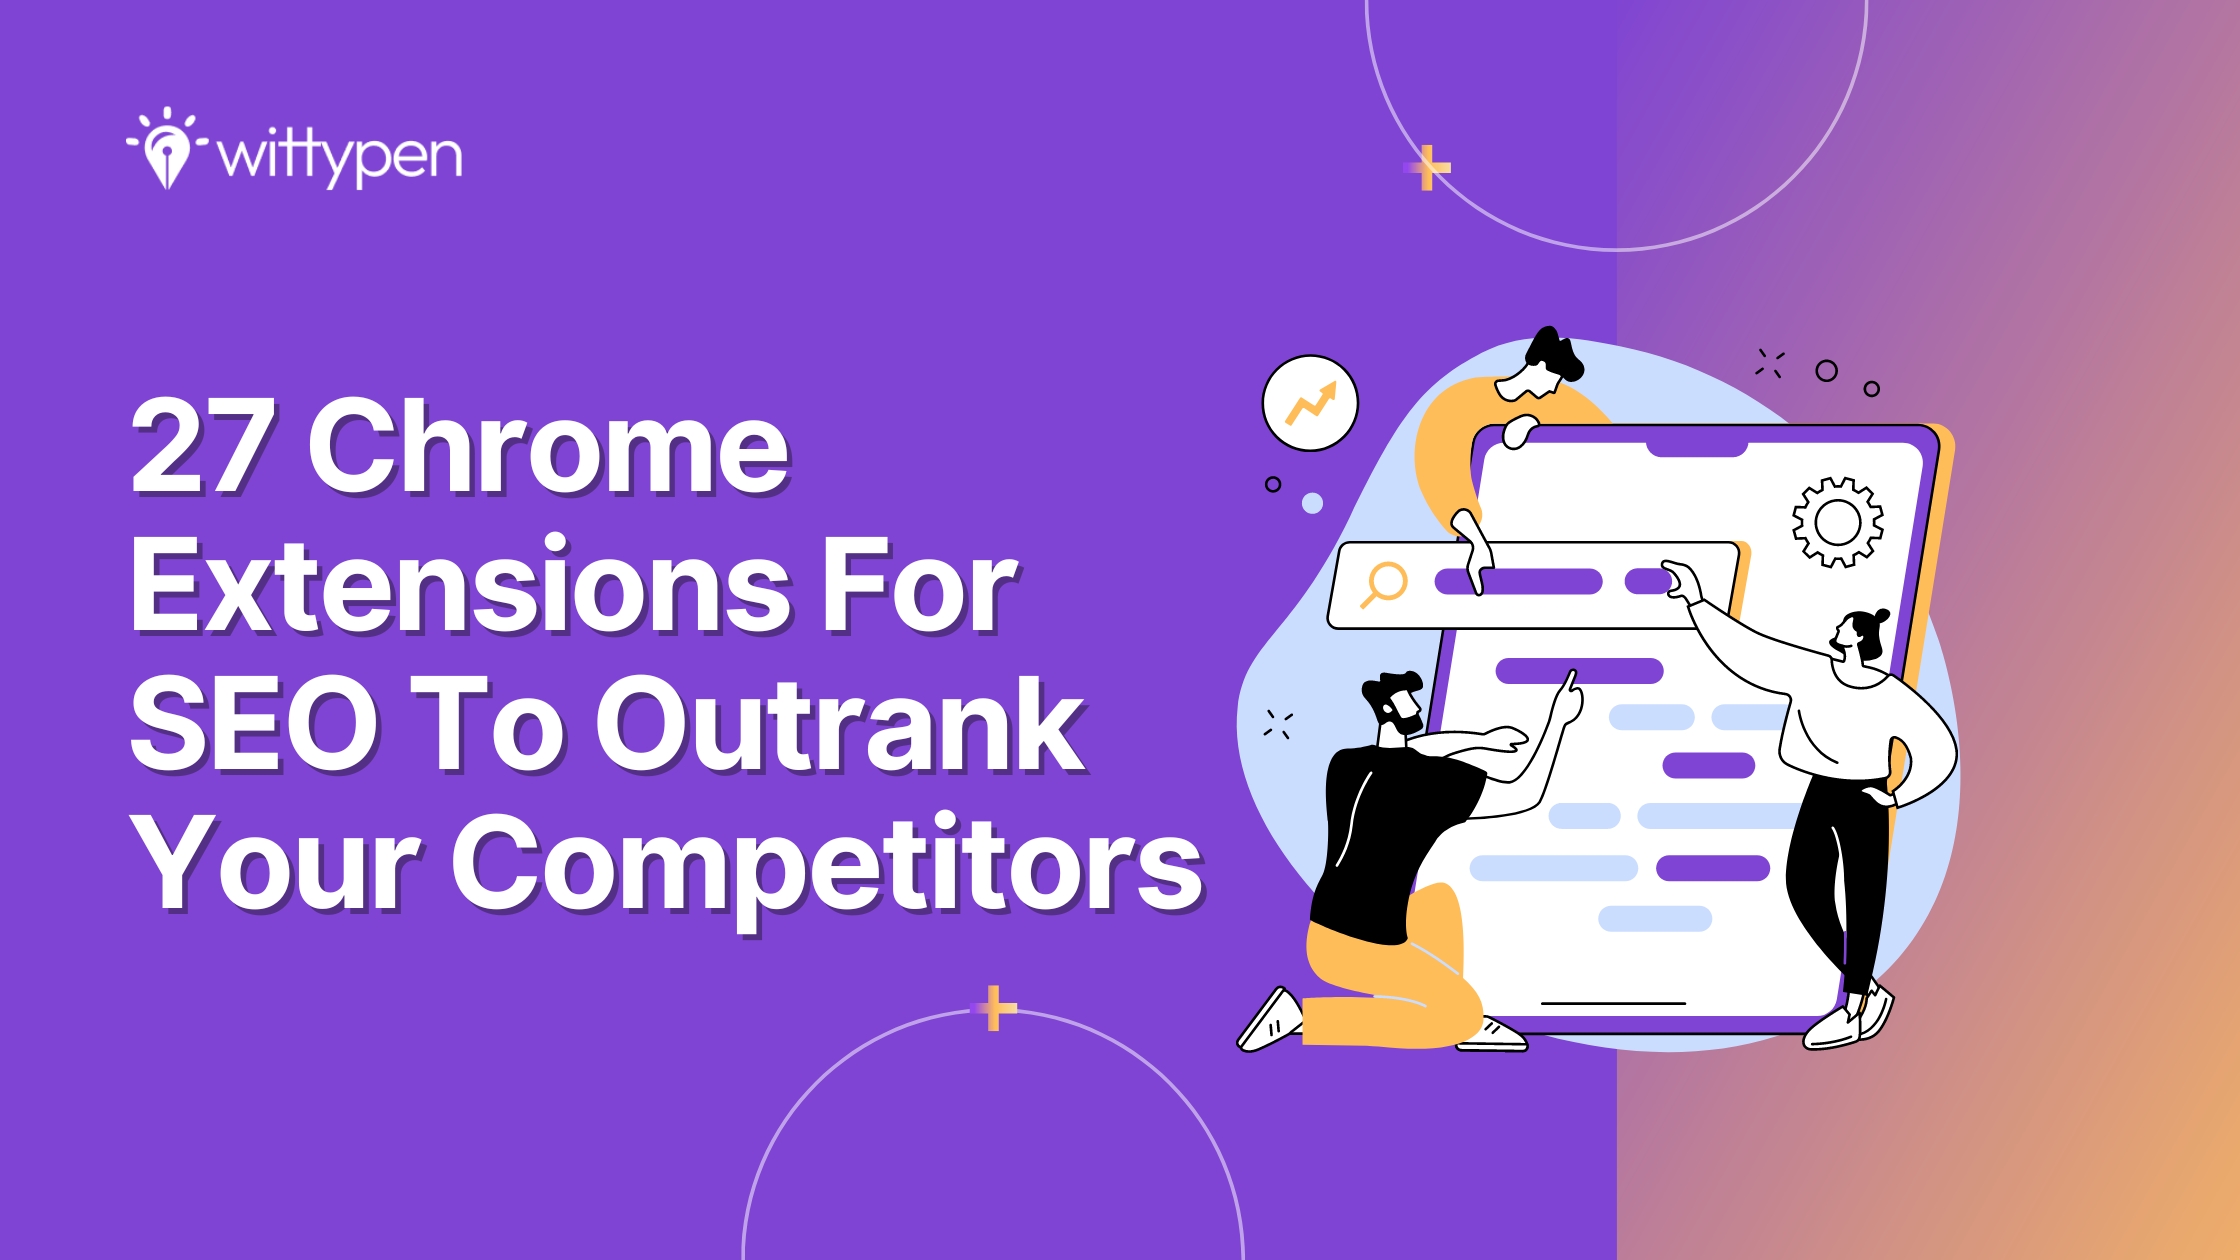 27 Chrome Extensions For SEO To Outrank Your Competitors